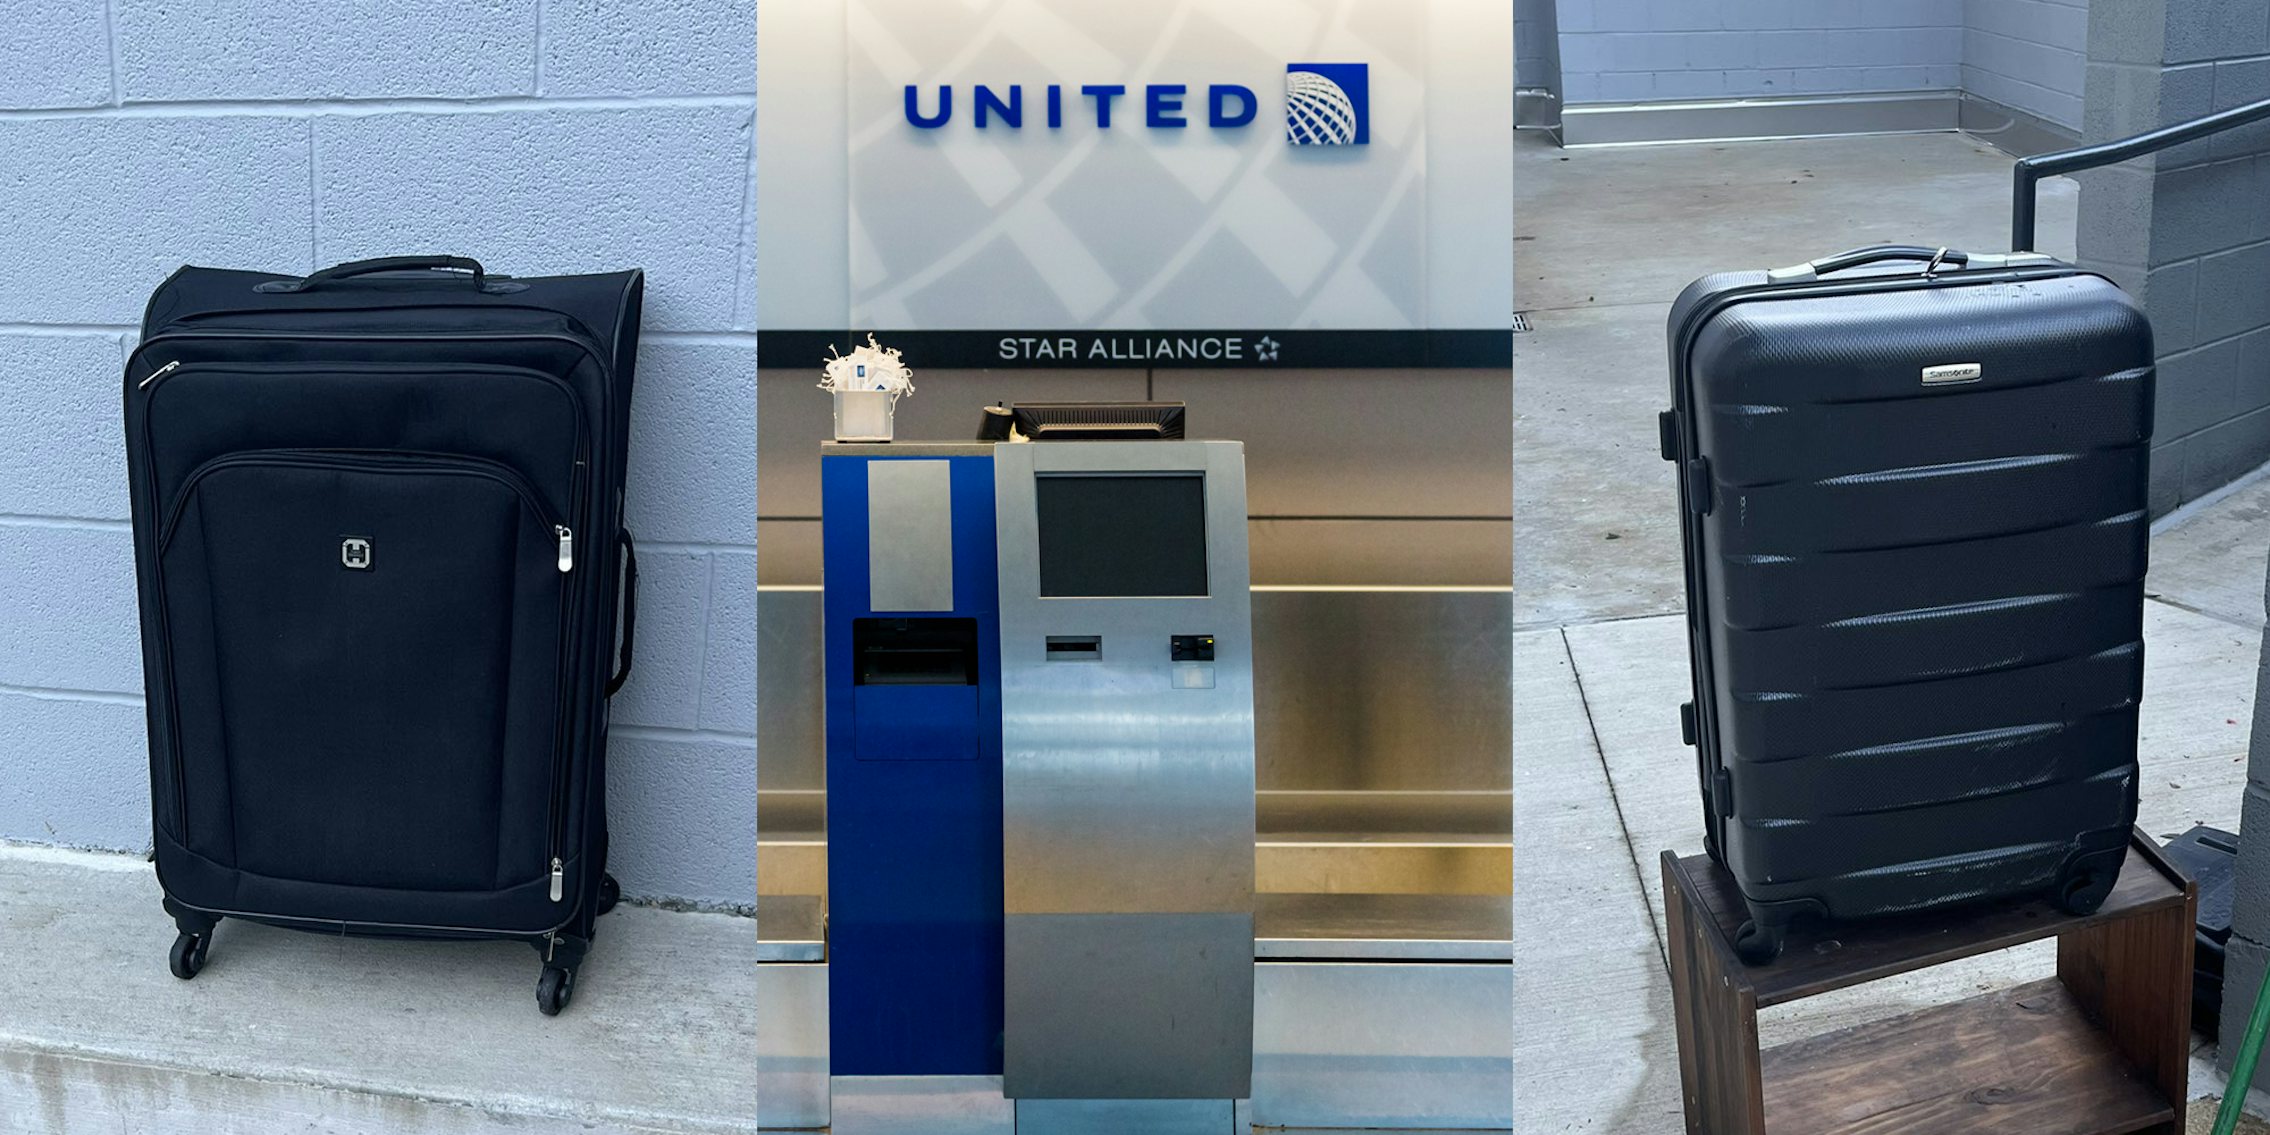 bag of luggage on concrete (l) United Airlines sign above counter (c) bag of luggage on wooden table on concrete (r)